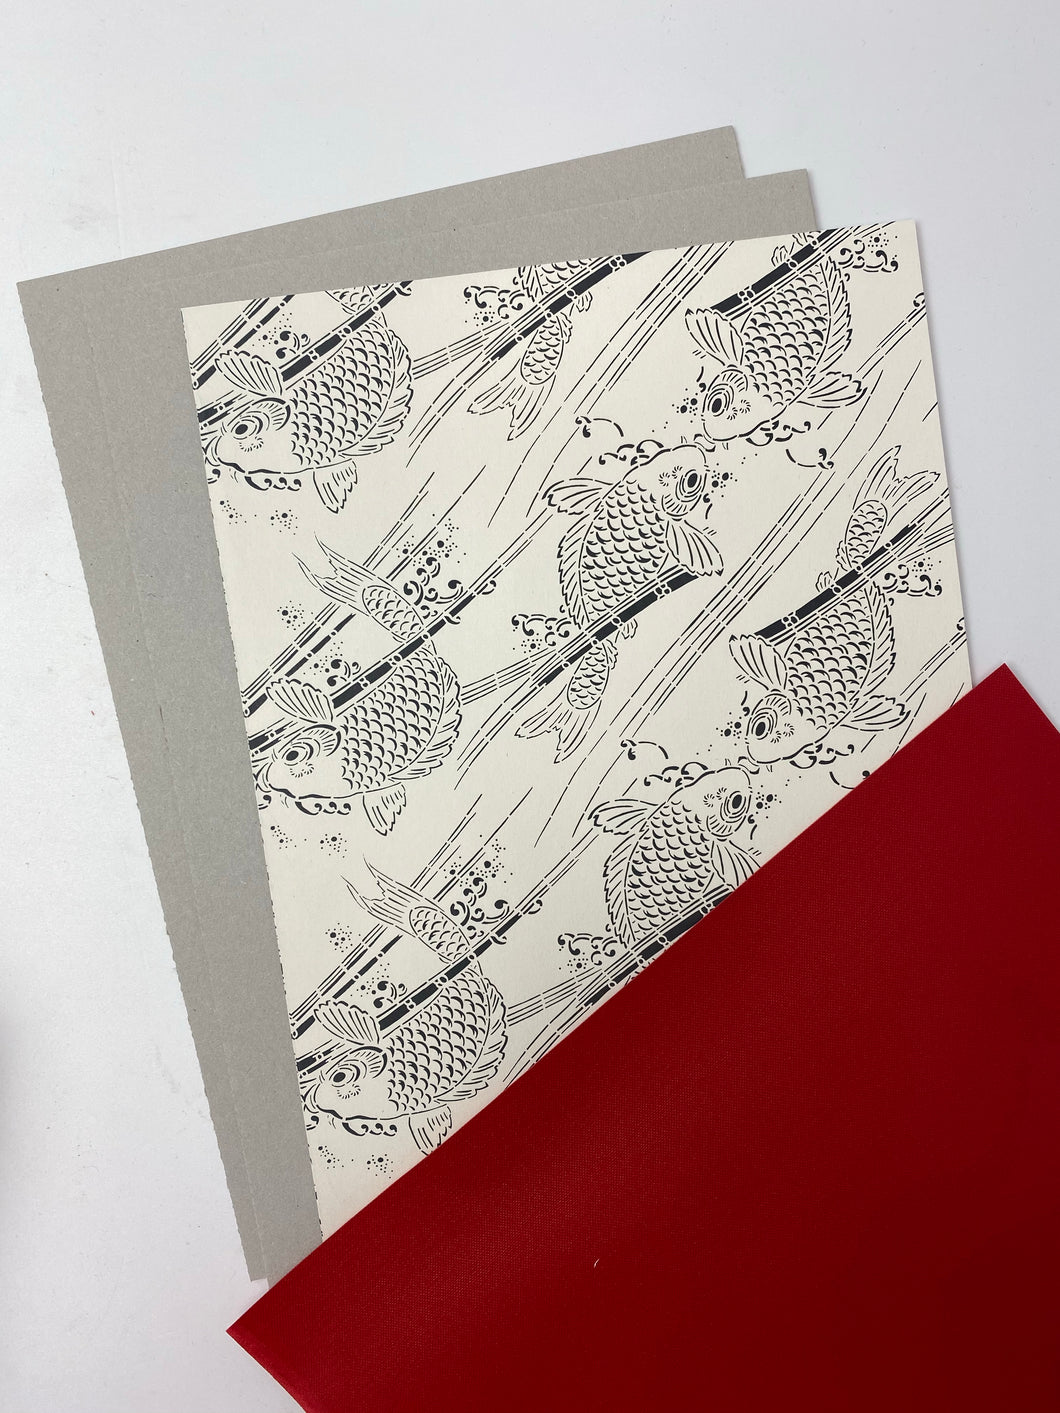 Refill Pack - Bookcloth, GreyBoard + End papers